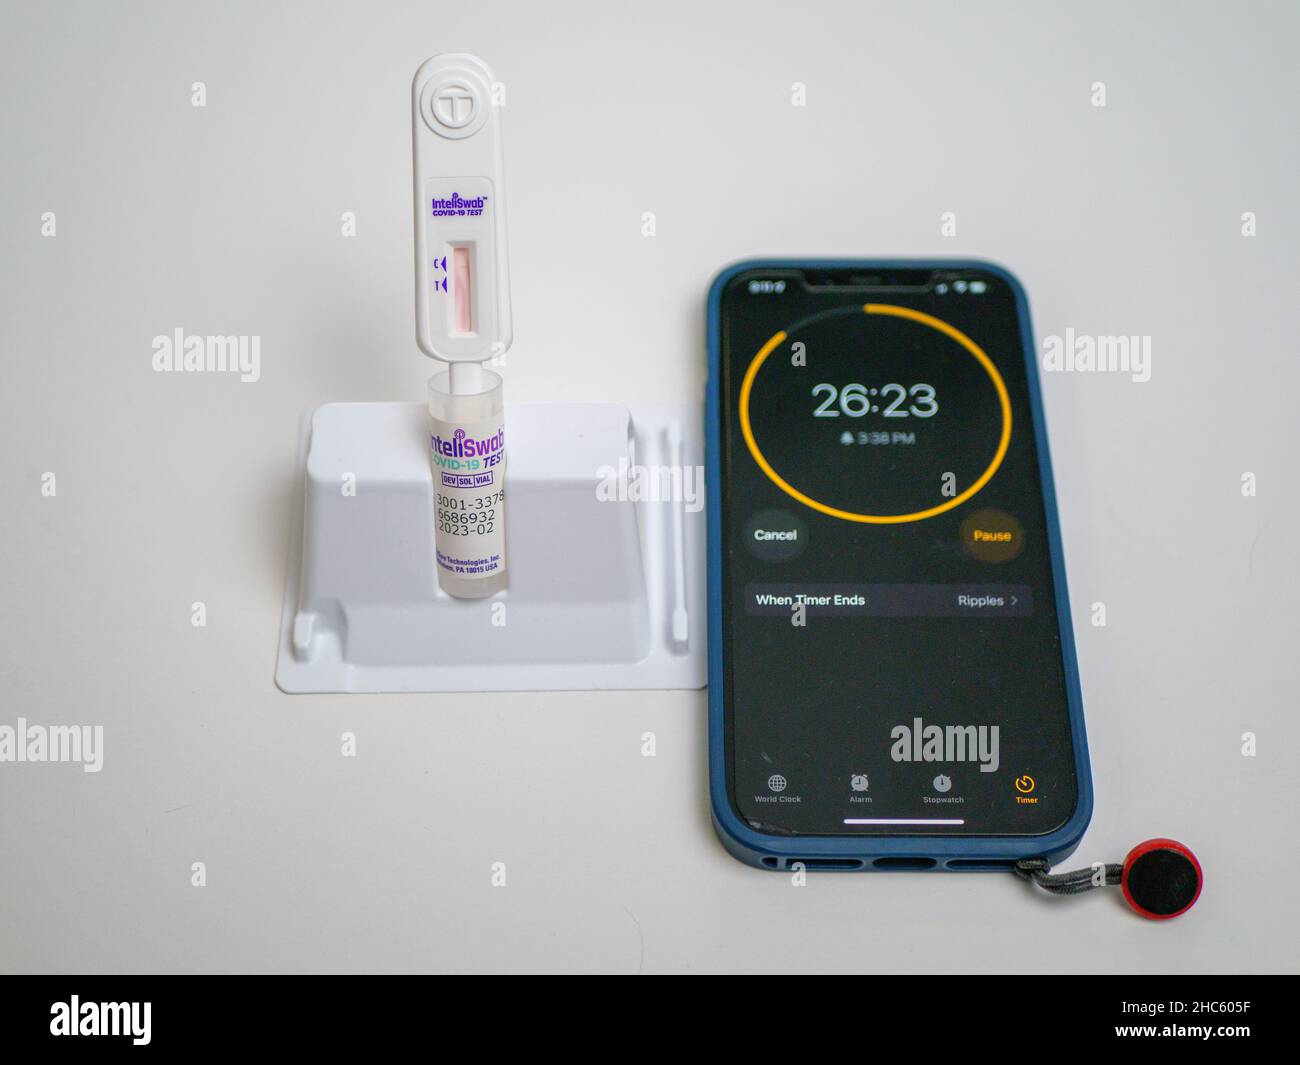 COVID-19 home antigen test kit. Test swab in reagent solution, cell phone used as timer. Stock Photo